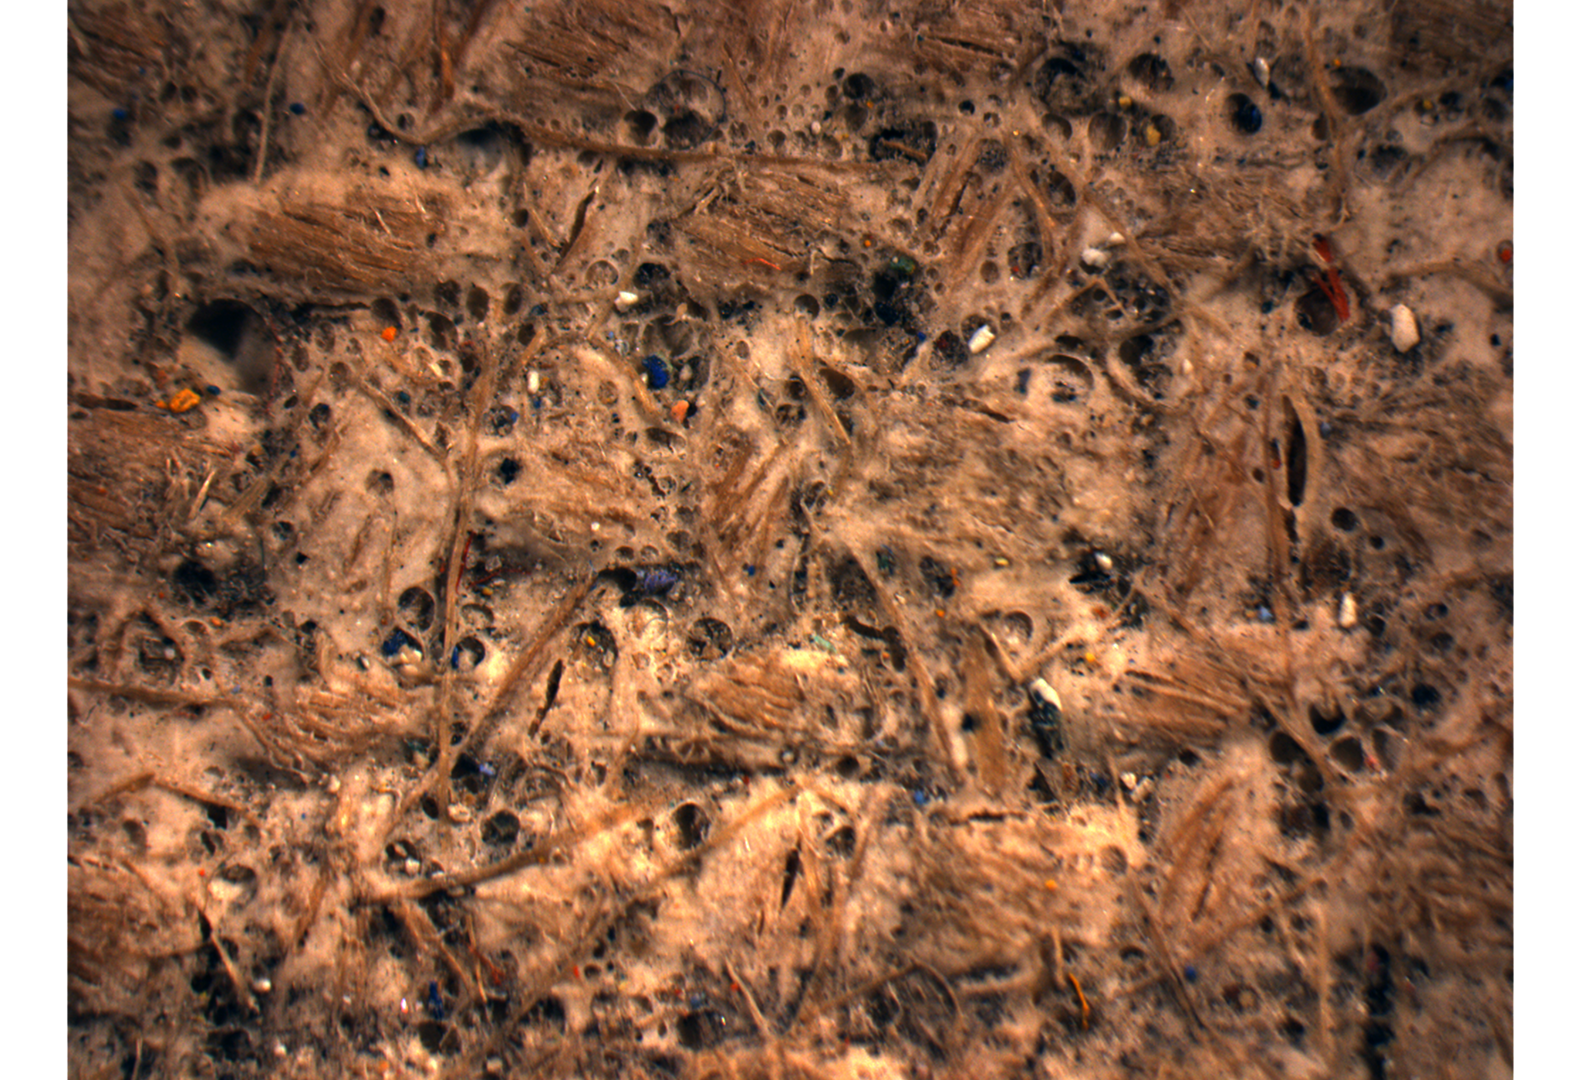 Microphotograph of ground layer of “The Village”, showing porous texture and multicolor paint inclusions